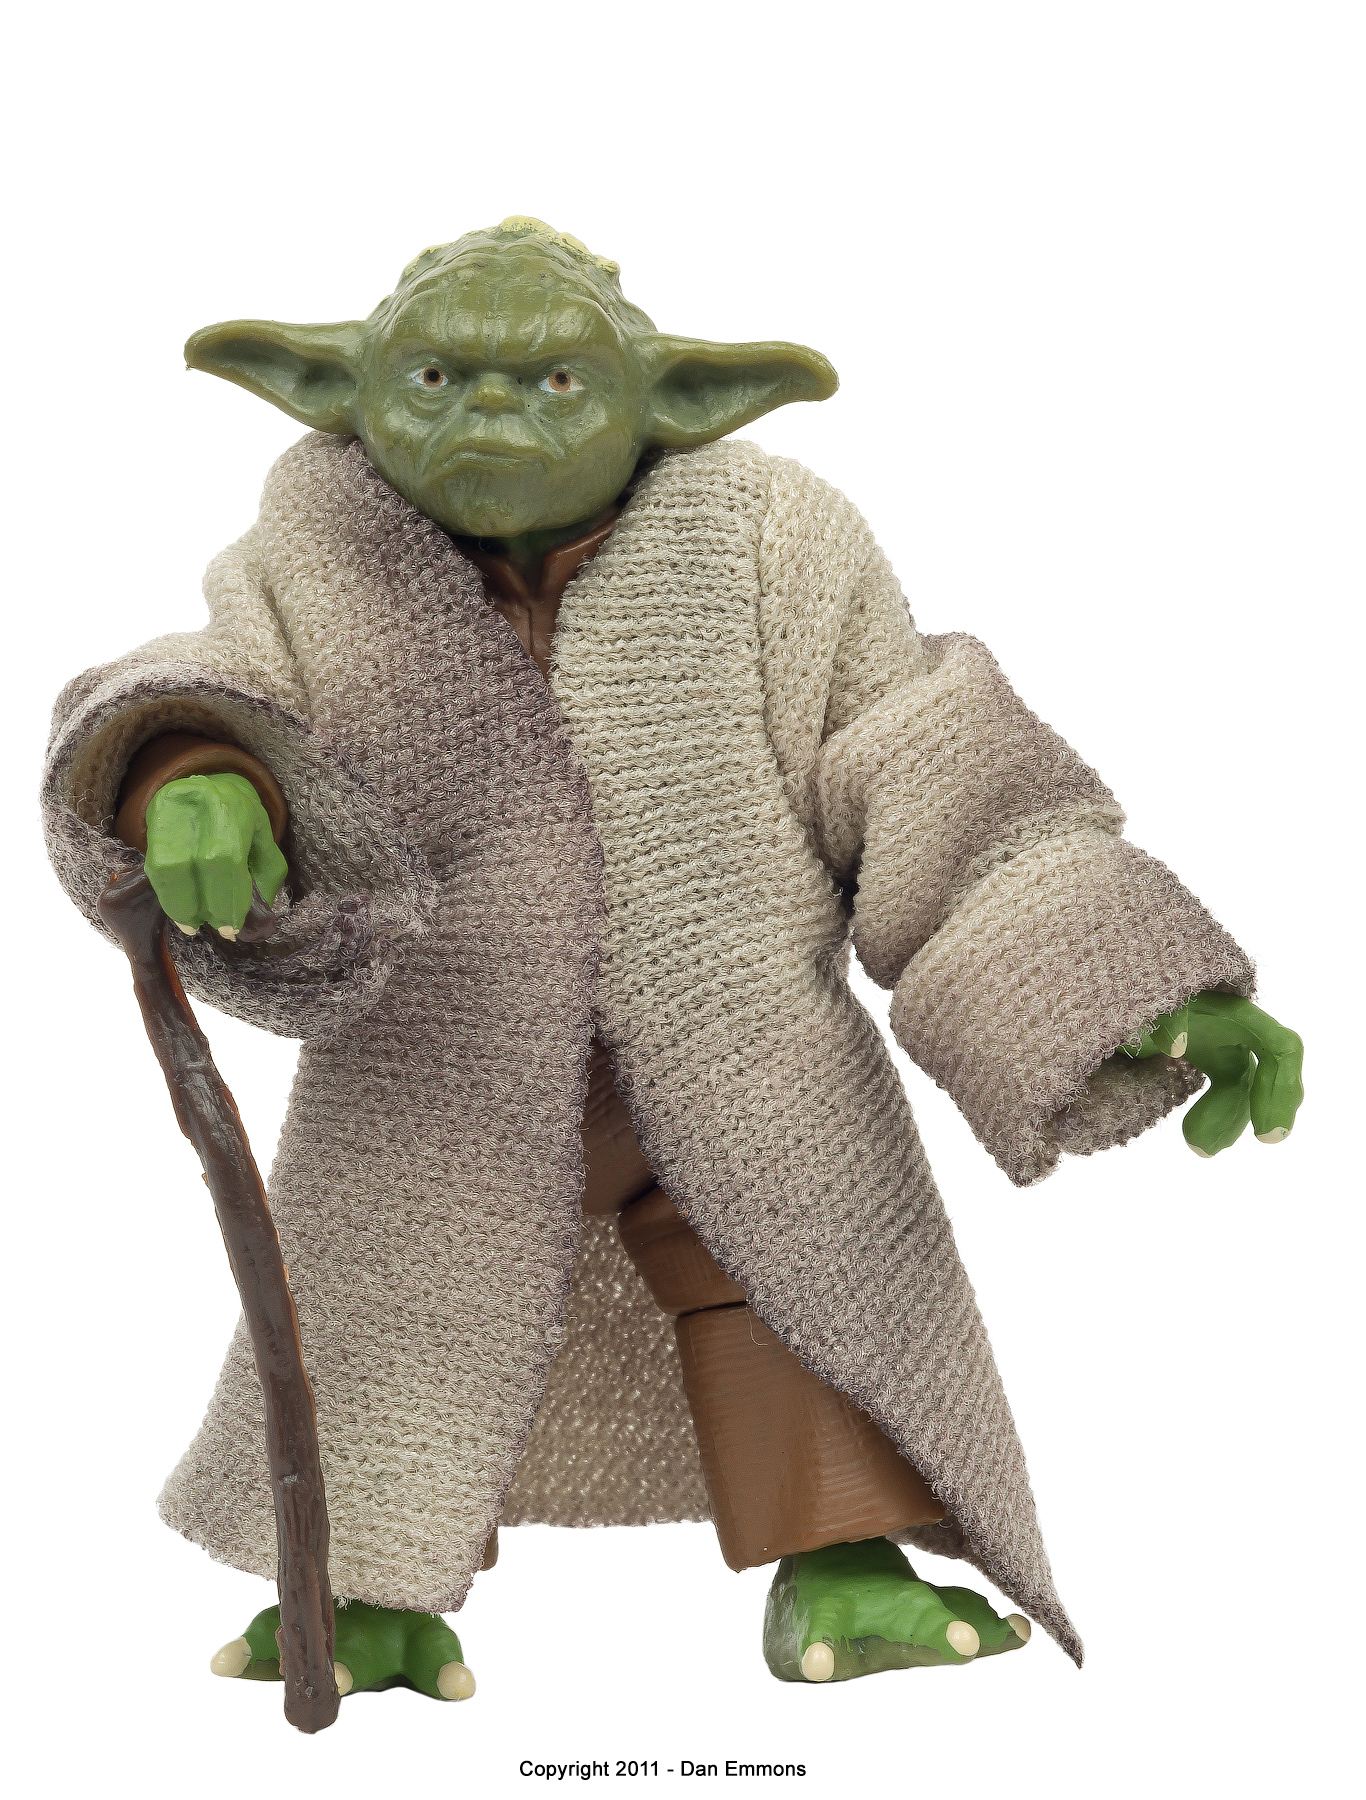 The Vintage Collection - VC20: Yoda